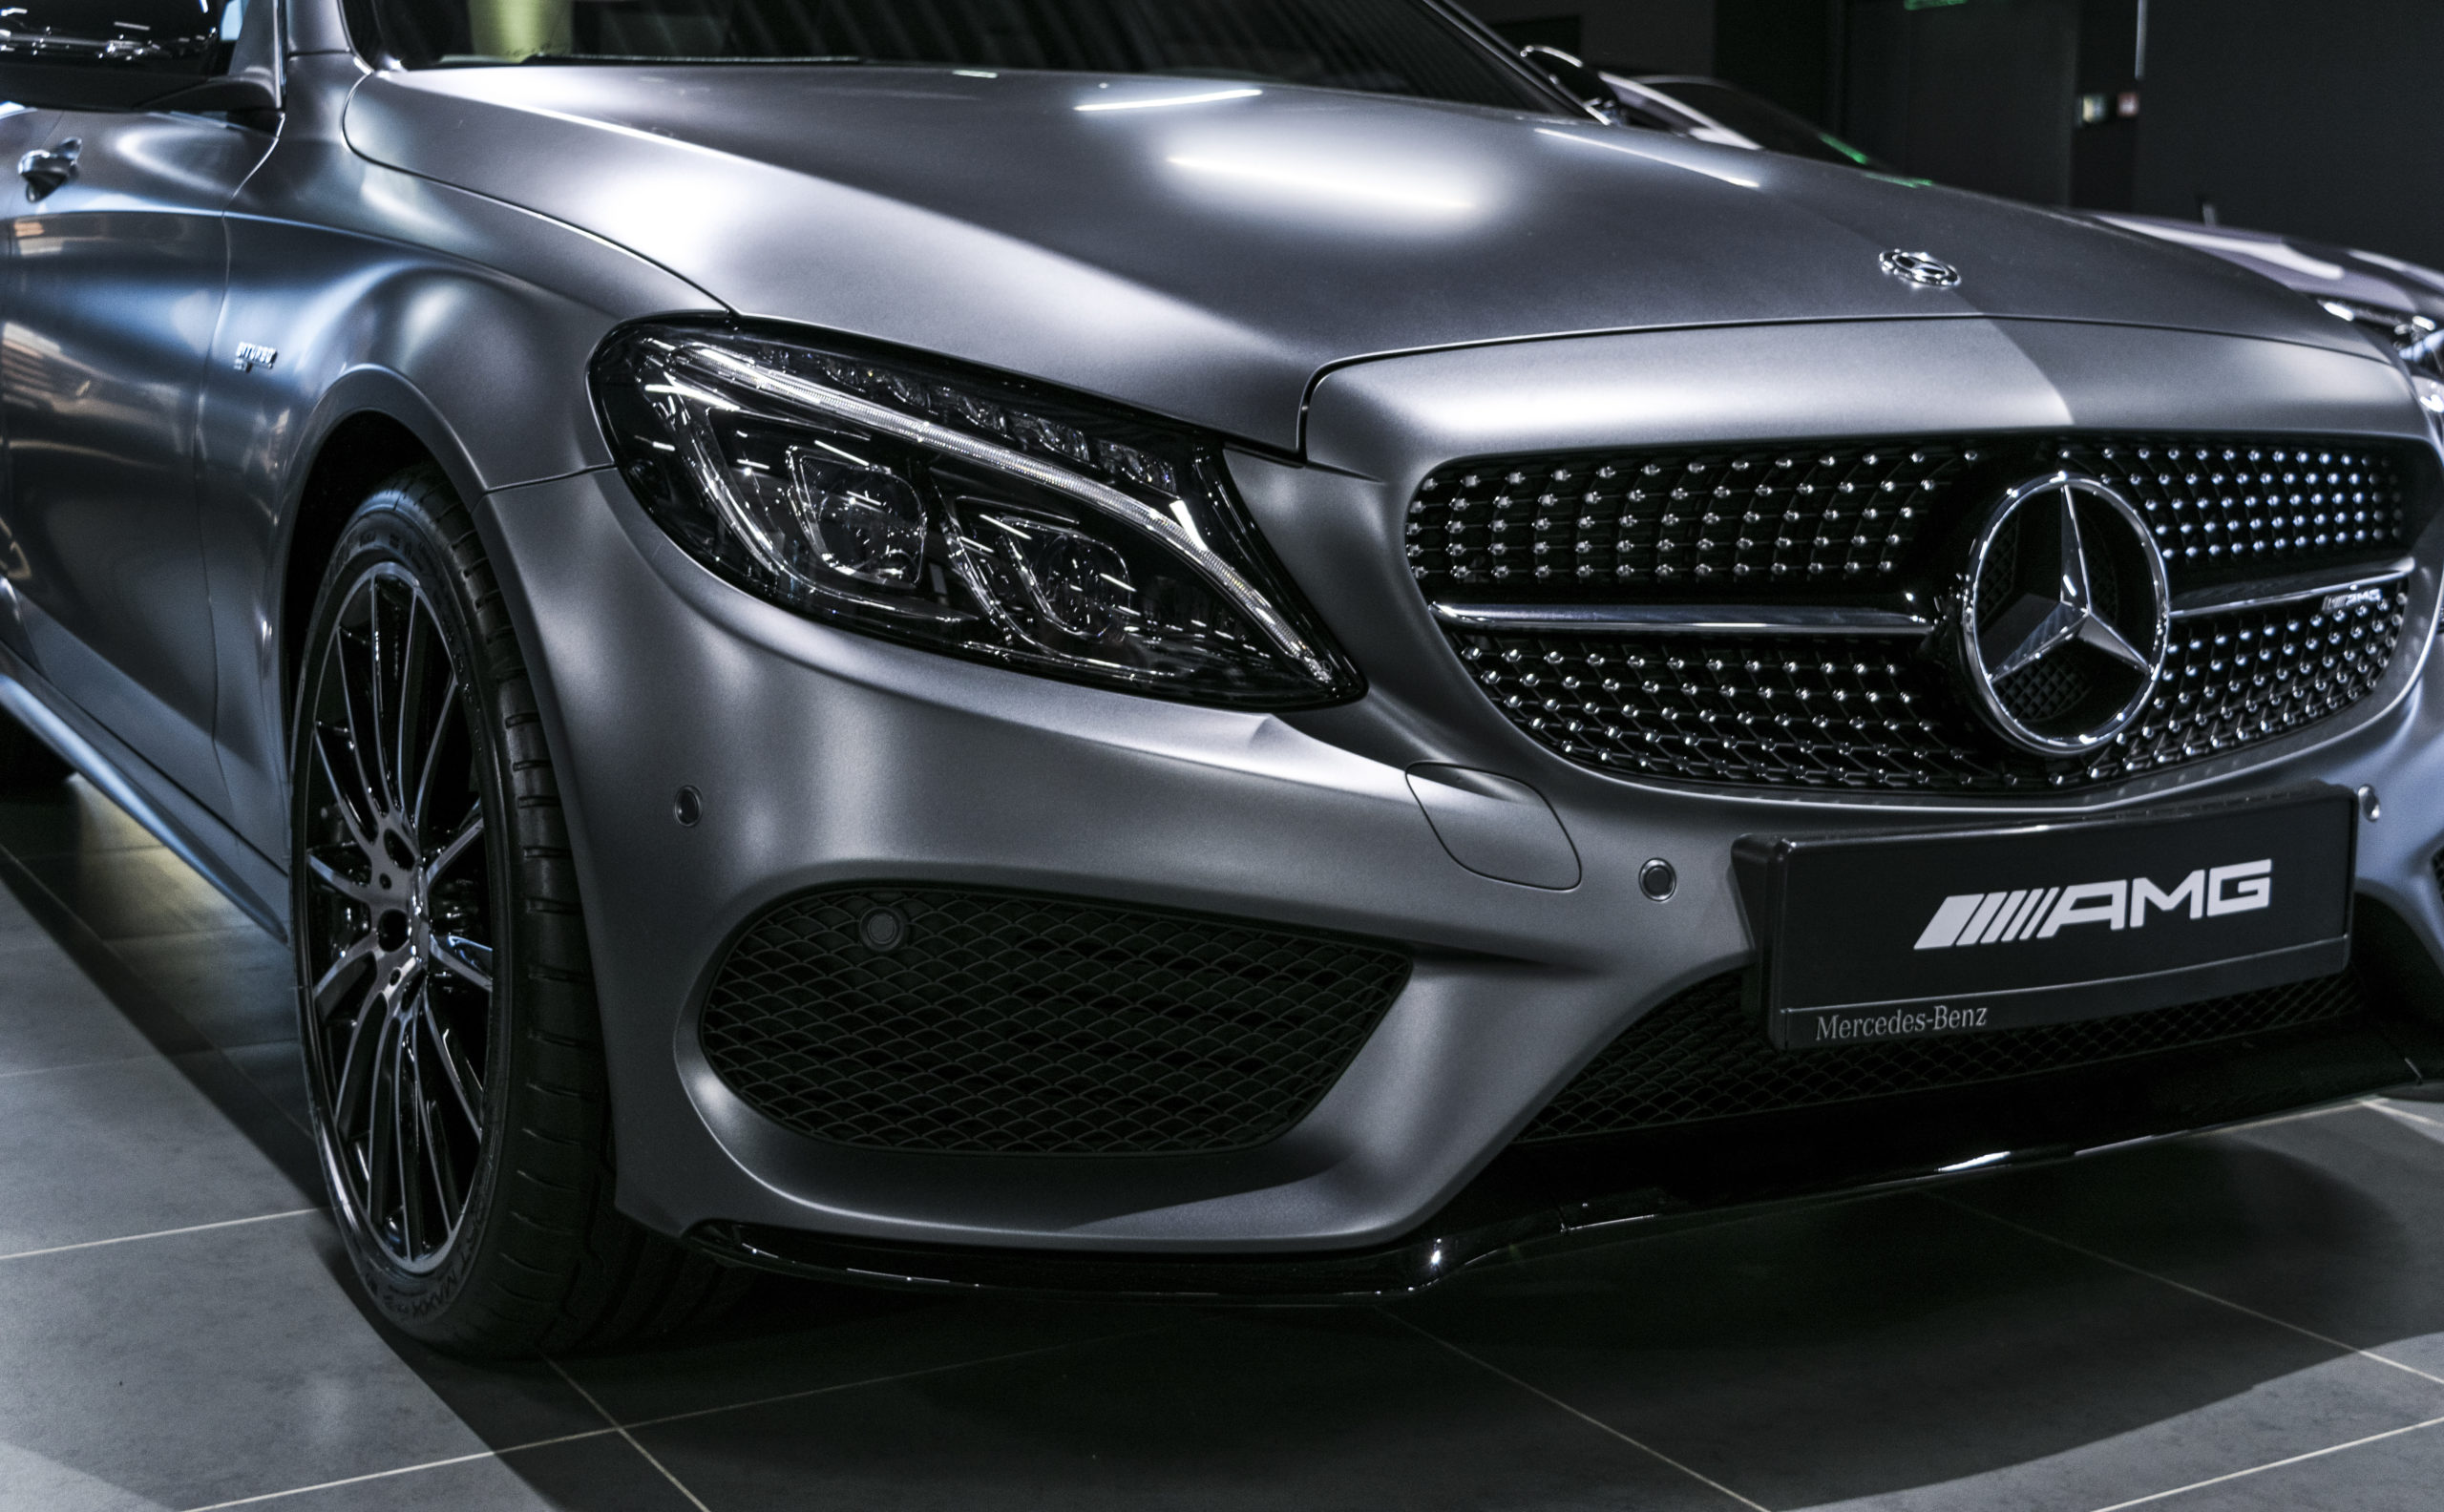 What’s the Big Deal About AMG Badged Cars?